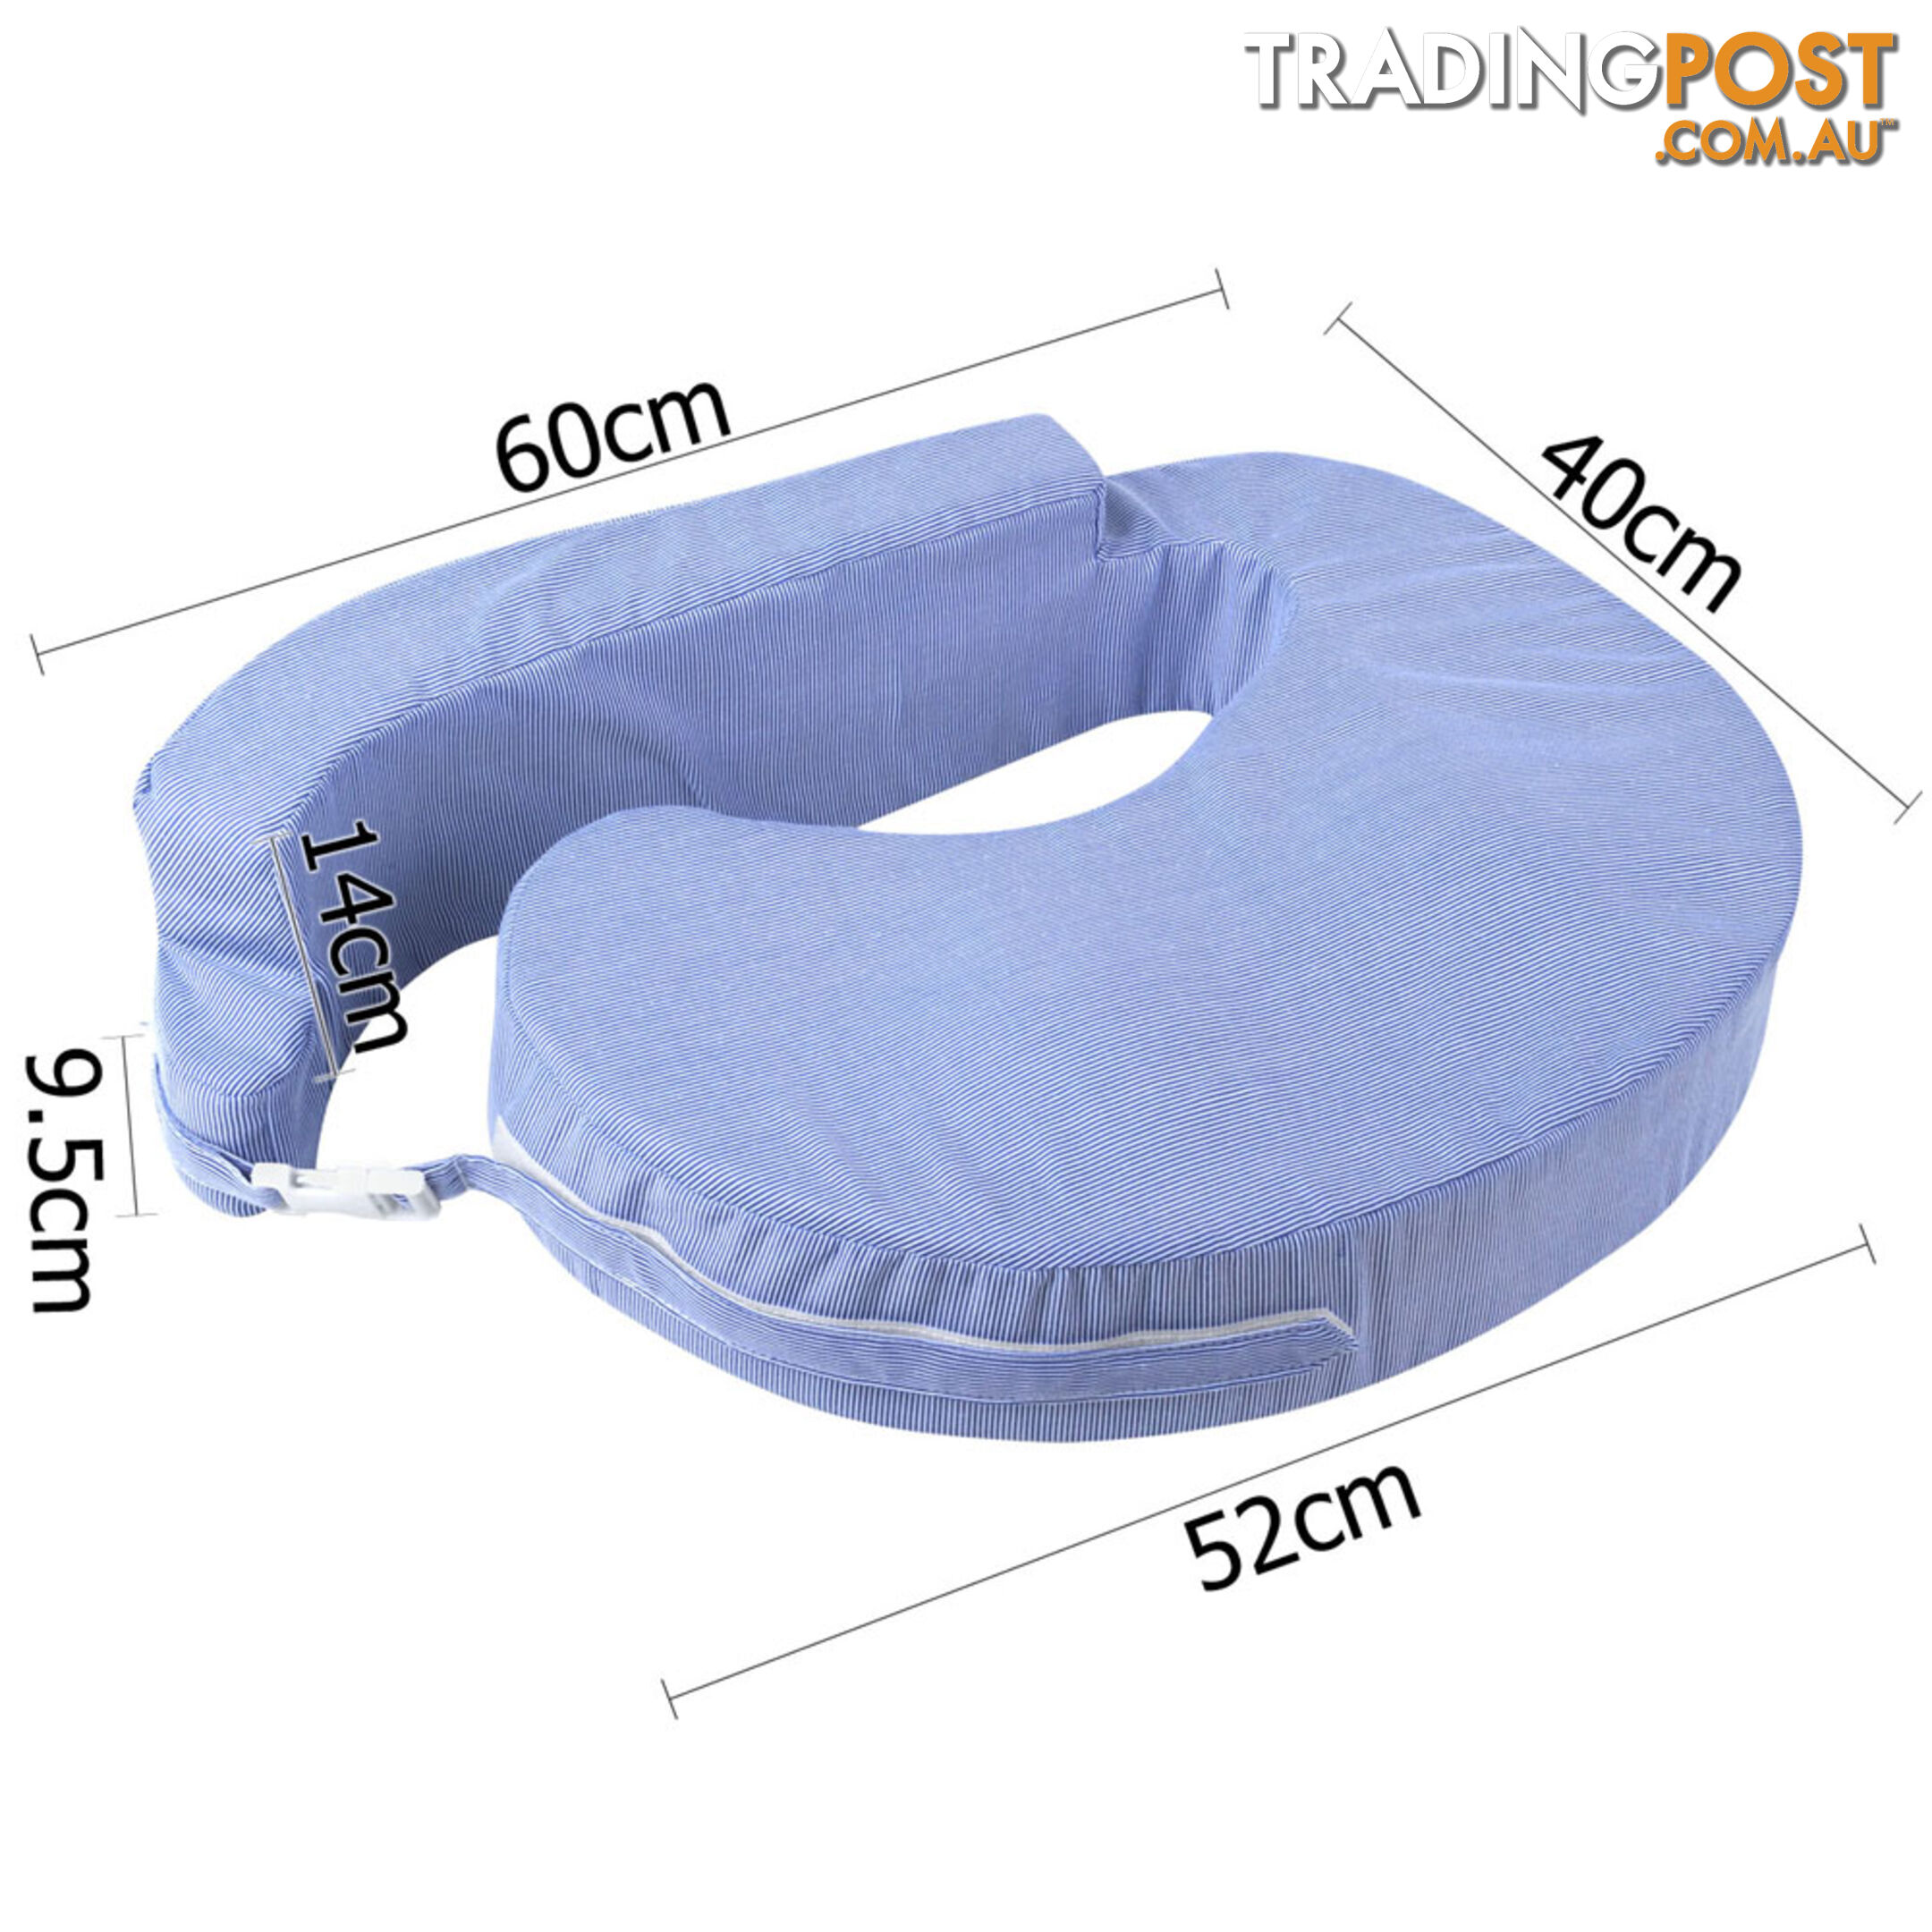 Baby Breast Feeding Support Memory Foam Pillow w/ Zip Cover Blue